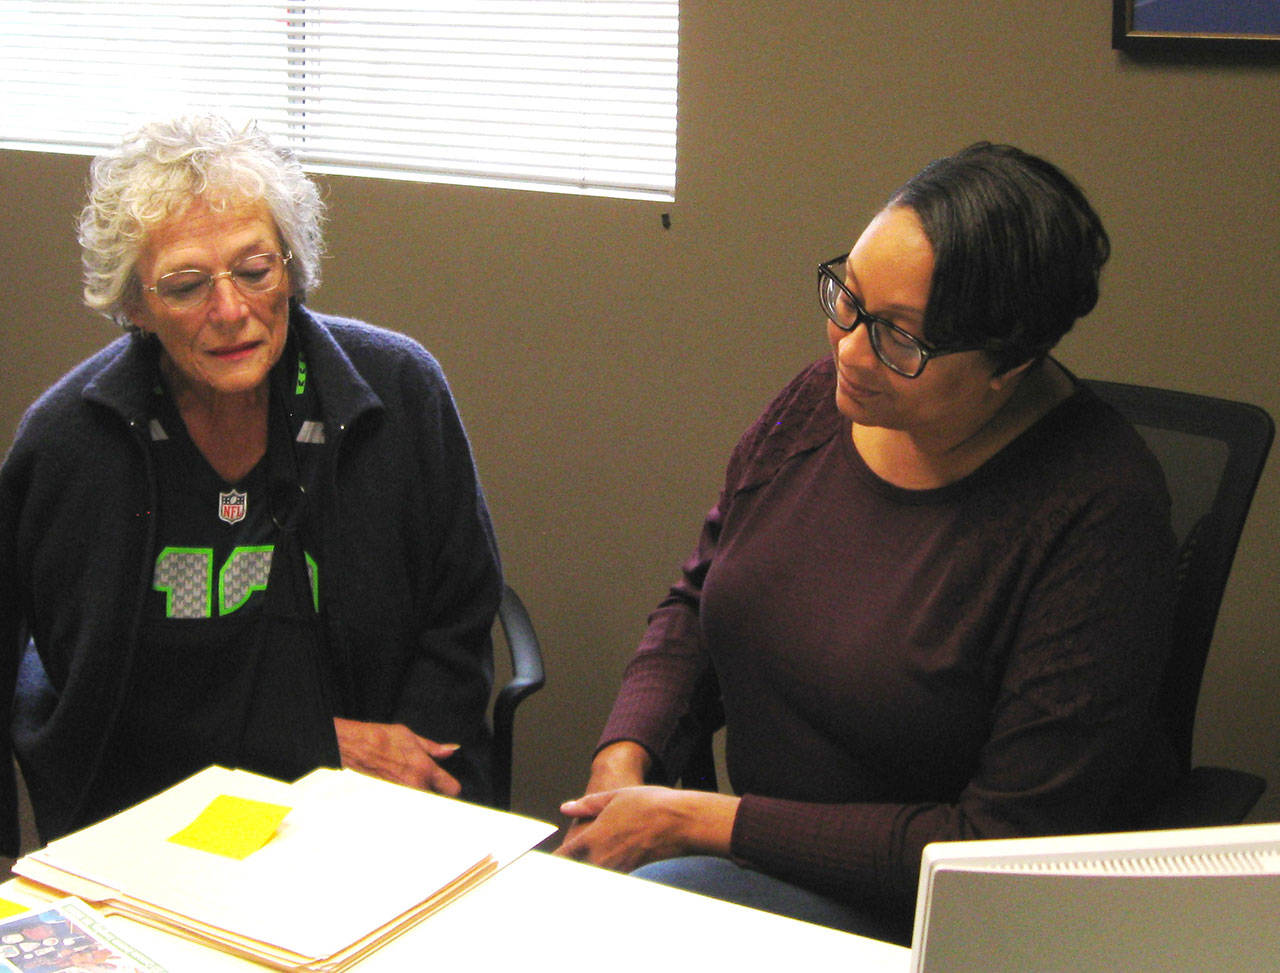 Photo by Dave Felice                                &lt;em&gt;Maureen MacDonald (left) of the Genealogical Society of South Whidbey Island looks at documents with Island County Historical Society archivist Cassie Rittierodt.&lt;/em&gt;